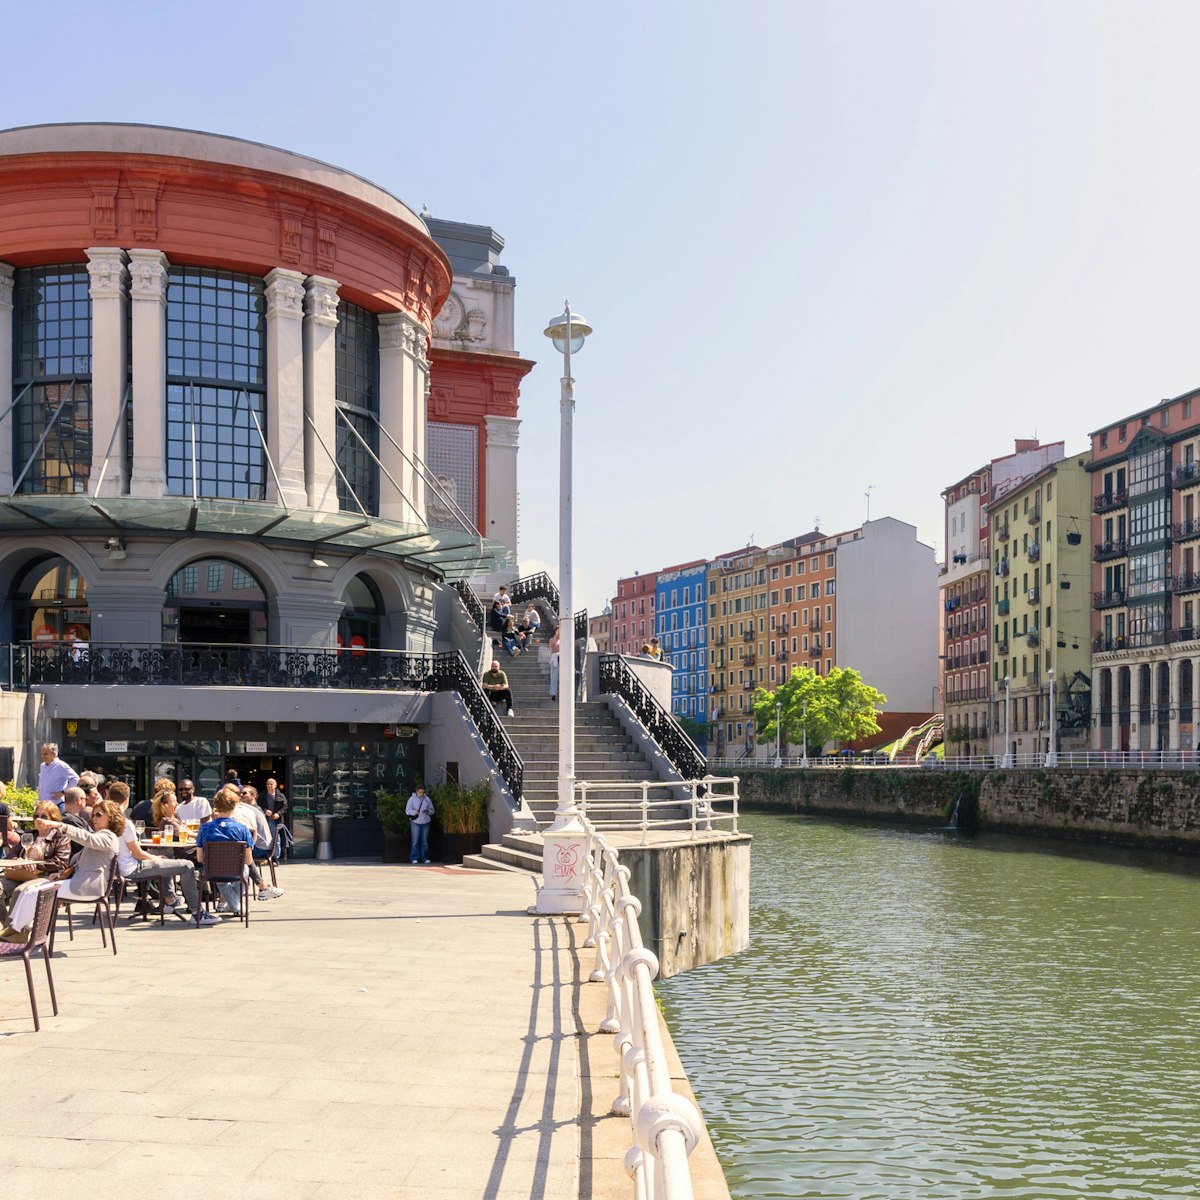 Bilbao, Spain. Bilbao Ribera market next to the Nervión river on a sunny day with people sitting on the terrace.